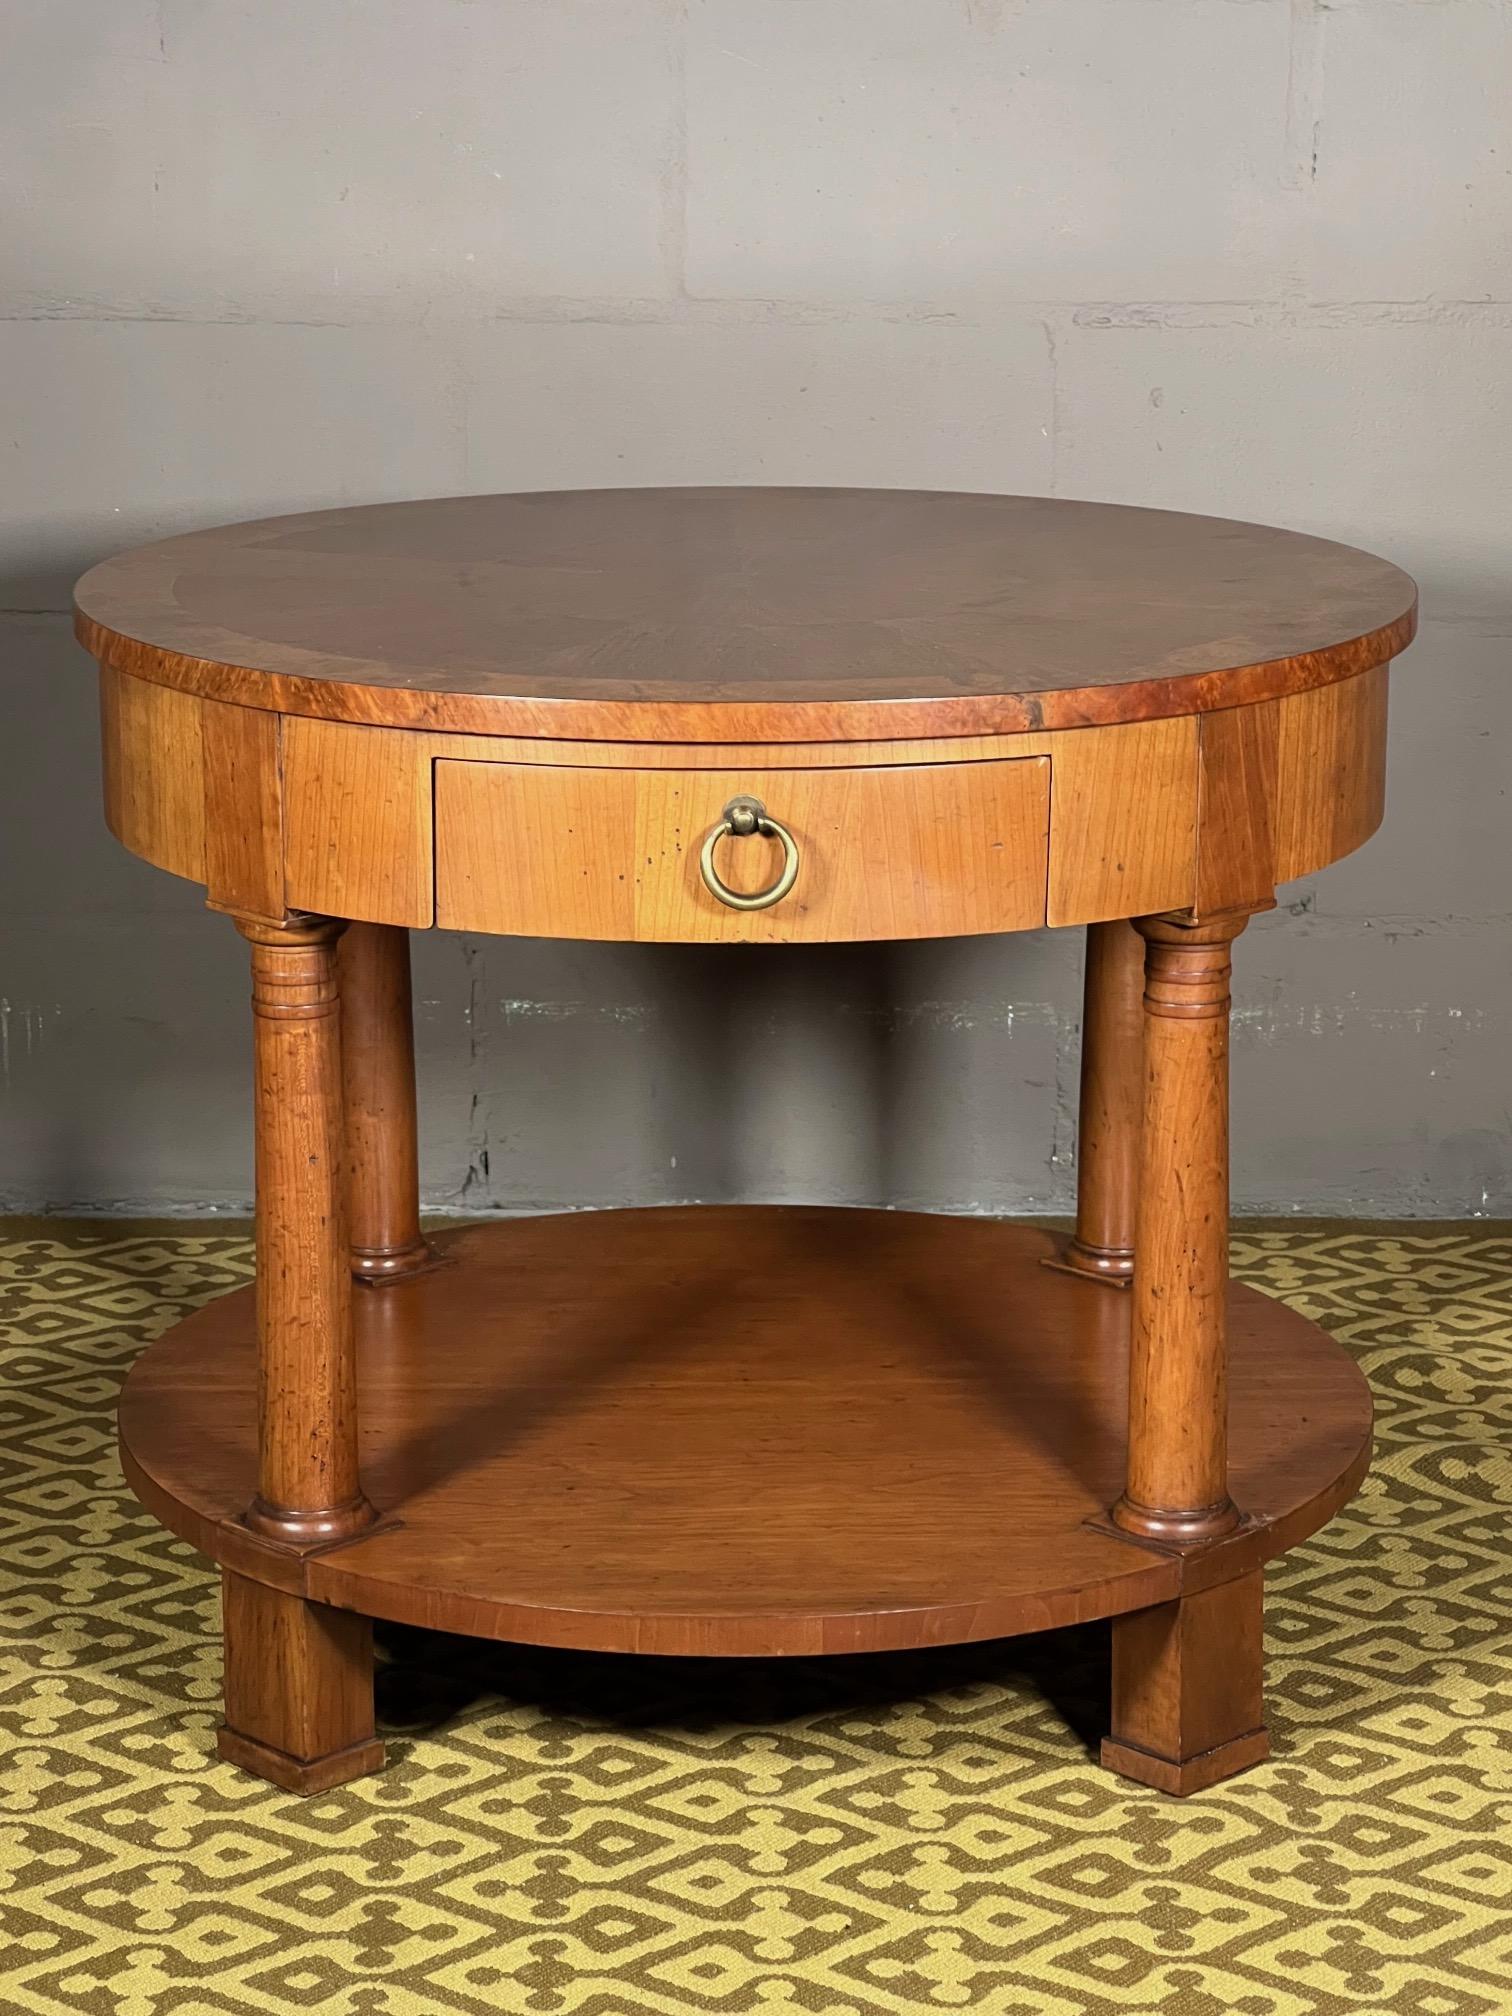 A beautiful Empire style cherry and walnut side or lamp table by Baker furniture. Ca' 1970's, solid brass hardware, pull out drawer. Heavy and very well made. Featuring a sunburst pattern top.